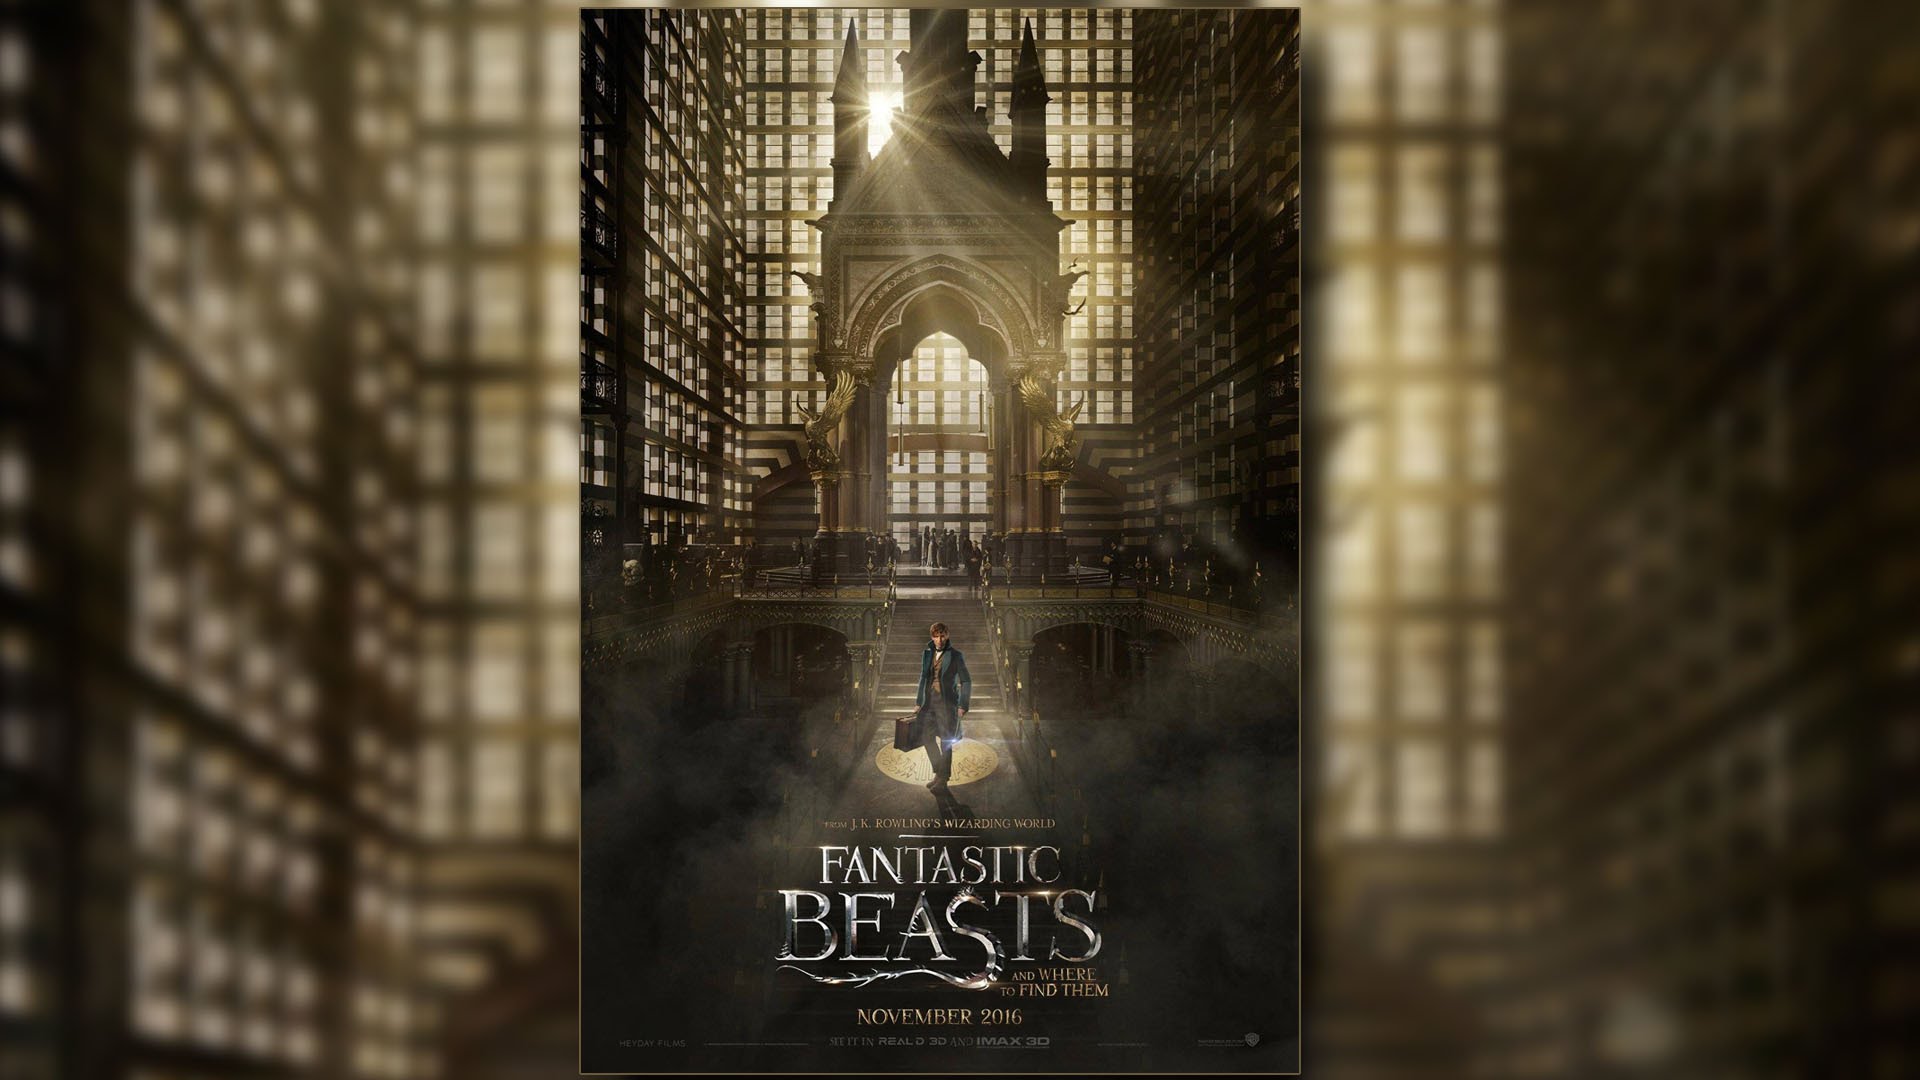 Fantastic Beasts And Where To Find Them Hd Wallpaper - Fantastic Beasts And Where To Find Them , HD Wallpaper & Backgrounds